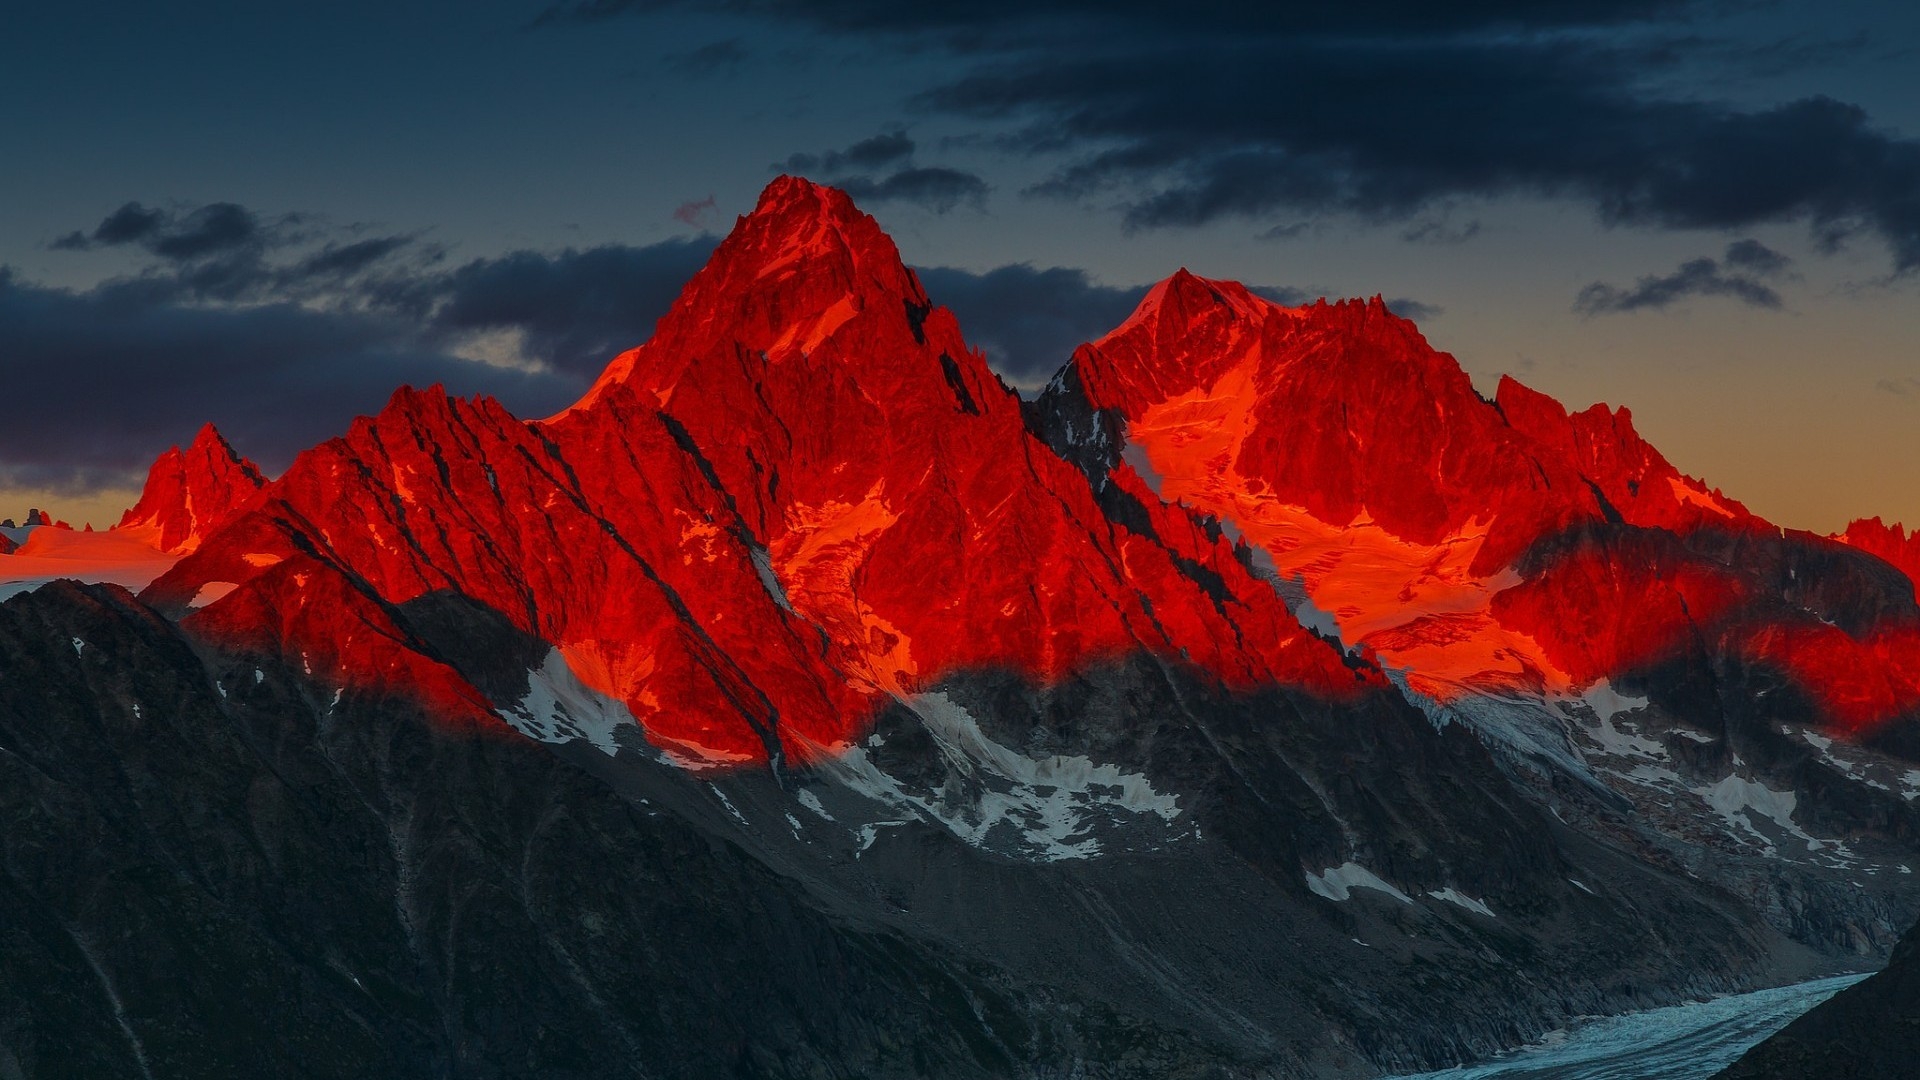 Red Sunset Over Mountains for 1920 x 1080 HDTV 1080p resolution